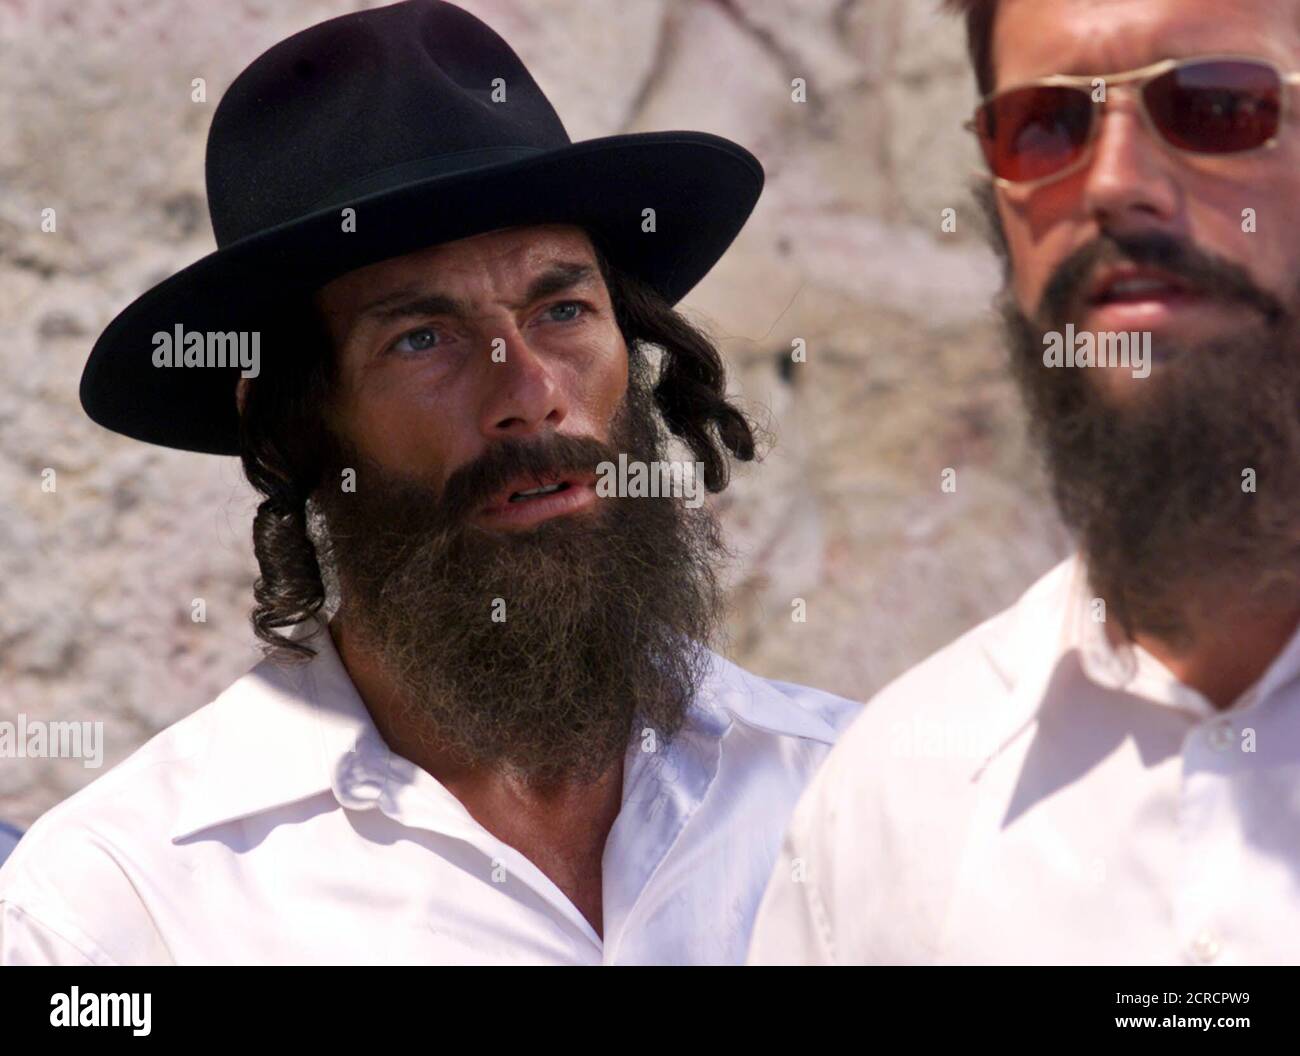 BELGIAN ACTOR JEAN CLAUDE VAN DAMME IS DRESSED AS AN ULTRA-ORTHODOX JEW  WHILE FILMING A MOVIE IN JERUSALEM. Belgian actor Jean Claude Van Damme  (L), clad in the costume of an ultra-Orthodox